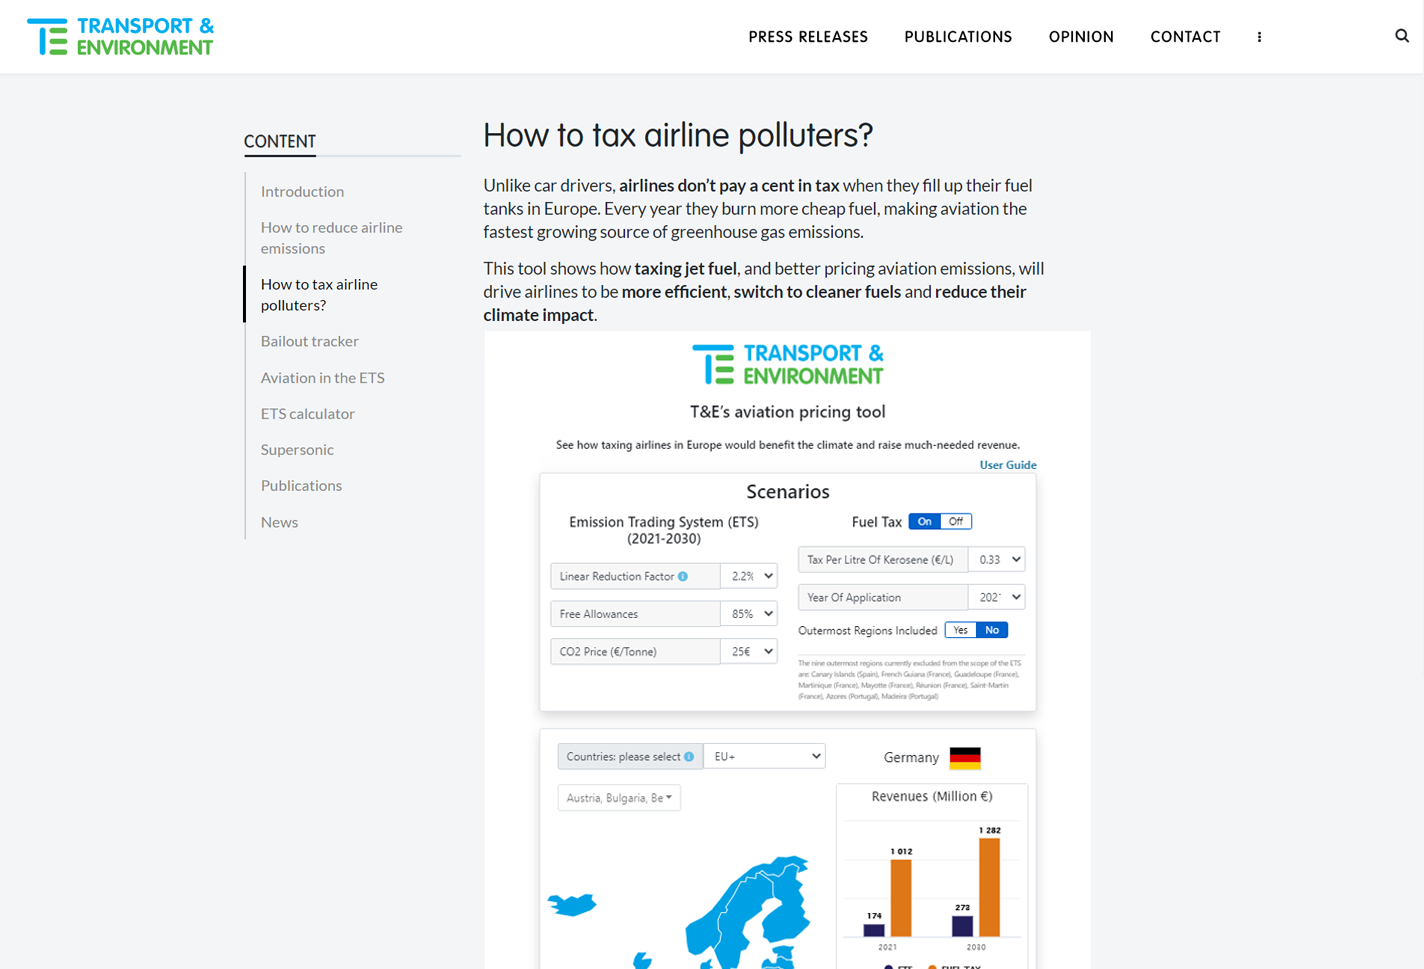 T&E’s Aviation Pricing Tool Main Page Inscope